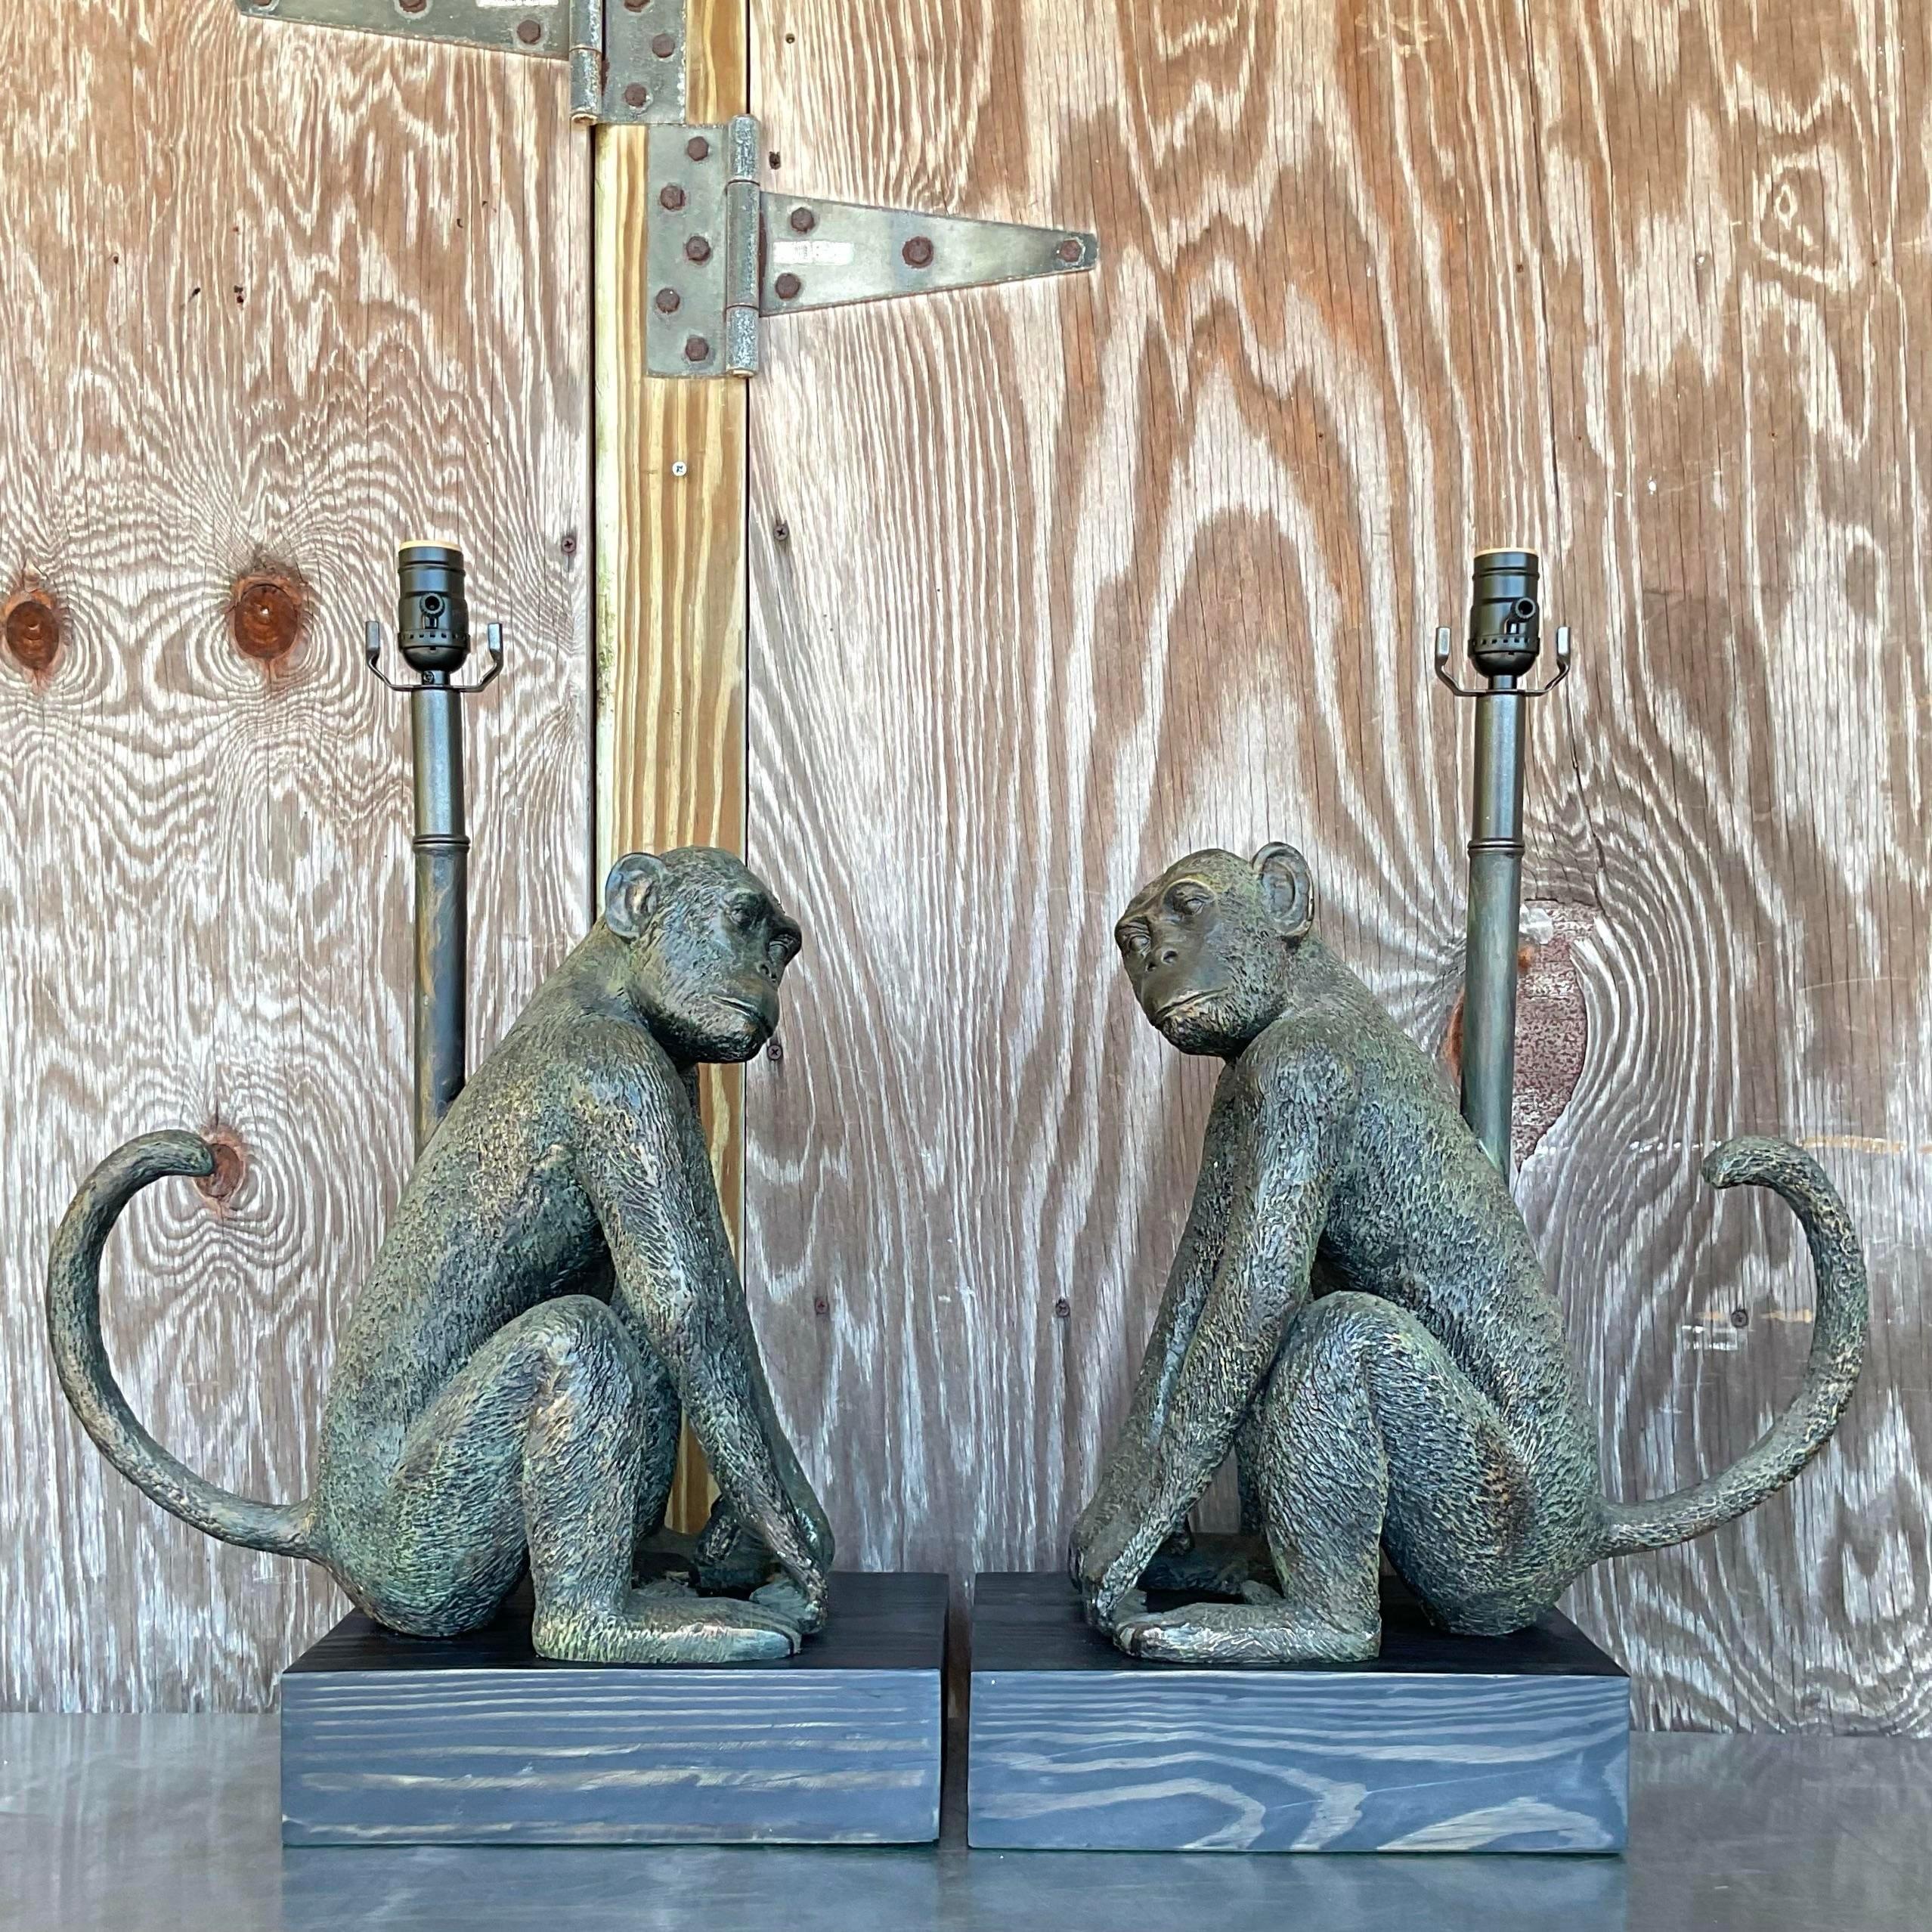 Illuminate your space with these vintage Boho monumental monkey table lamps. American-crafted with a rich patina, these lamps blend playful charm with artistic flair, making them a striking addition to eclectic or bohemian-inspired interiors